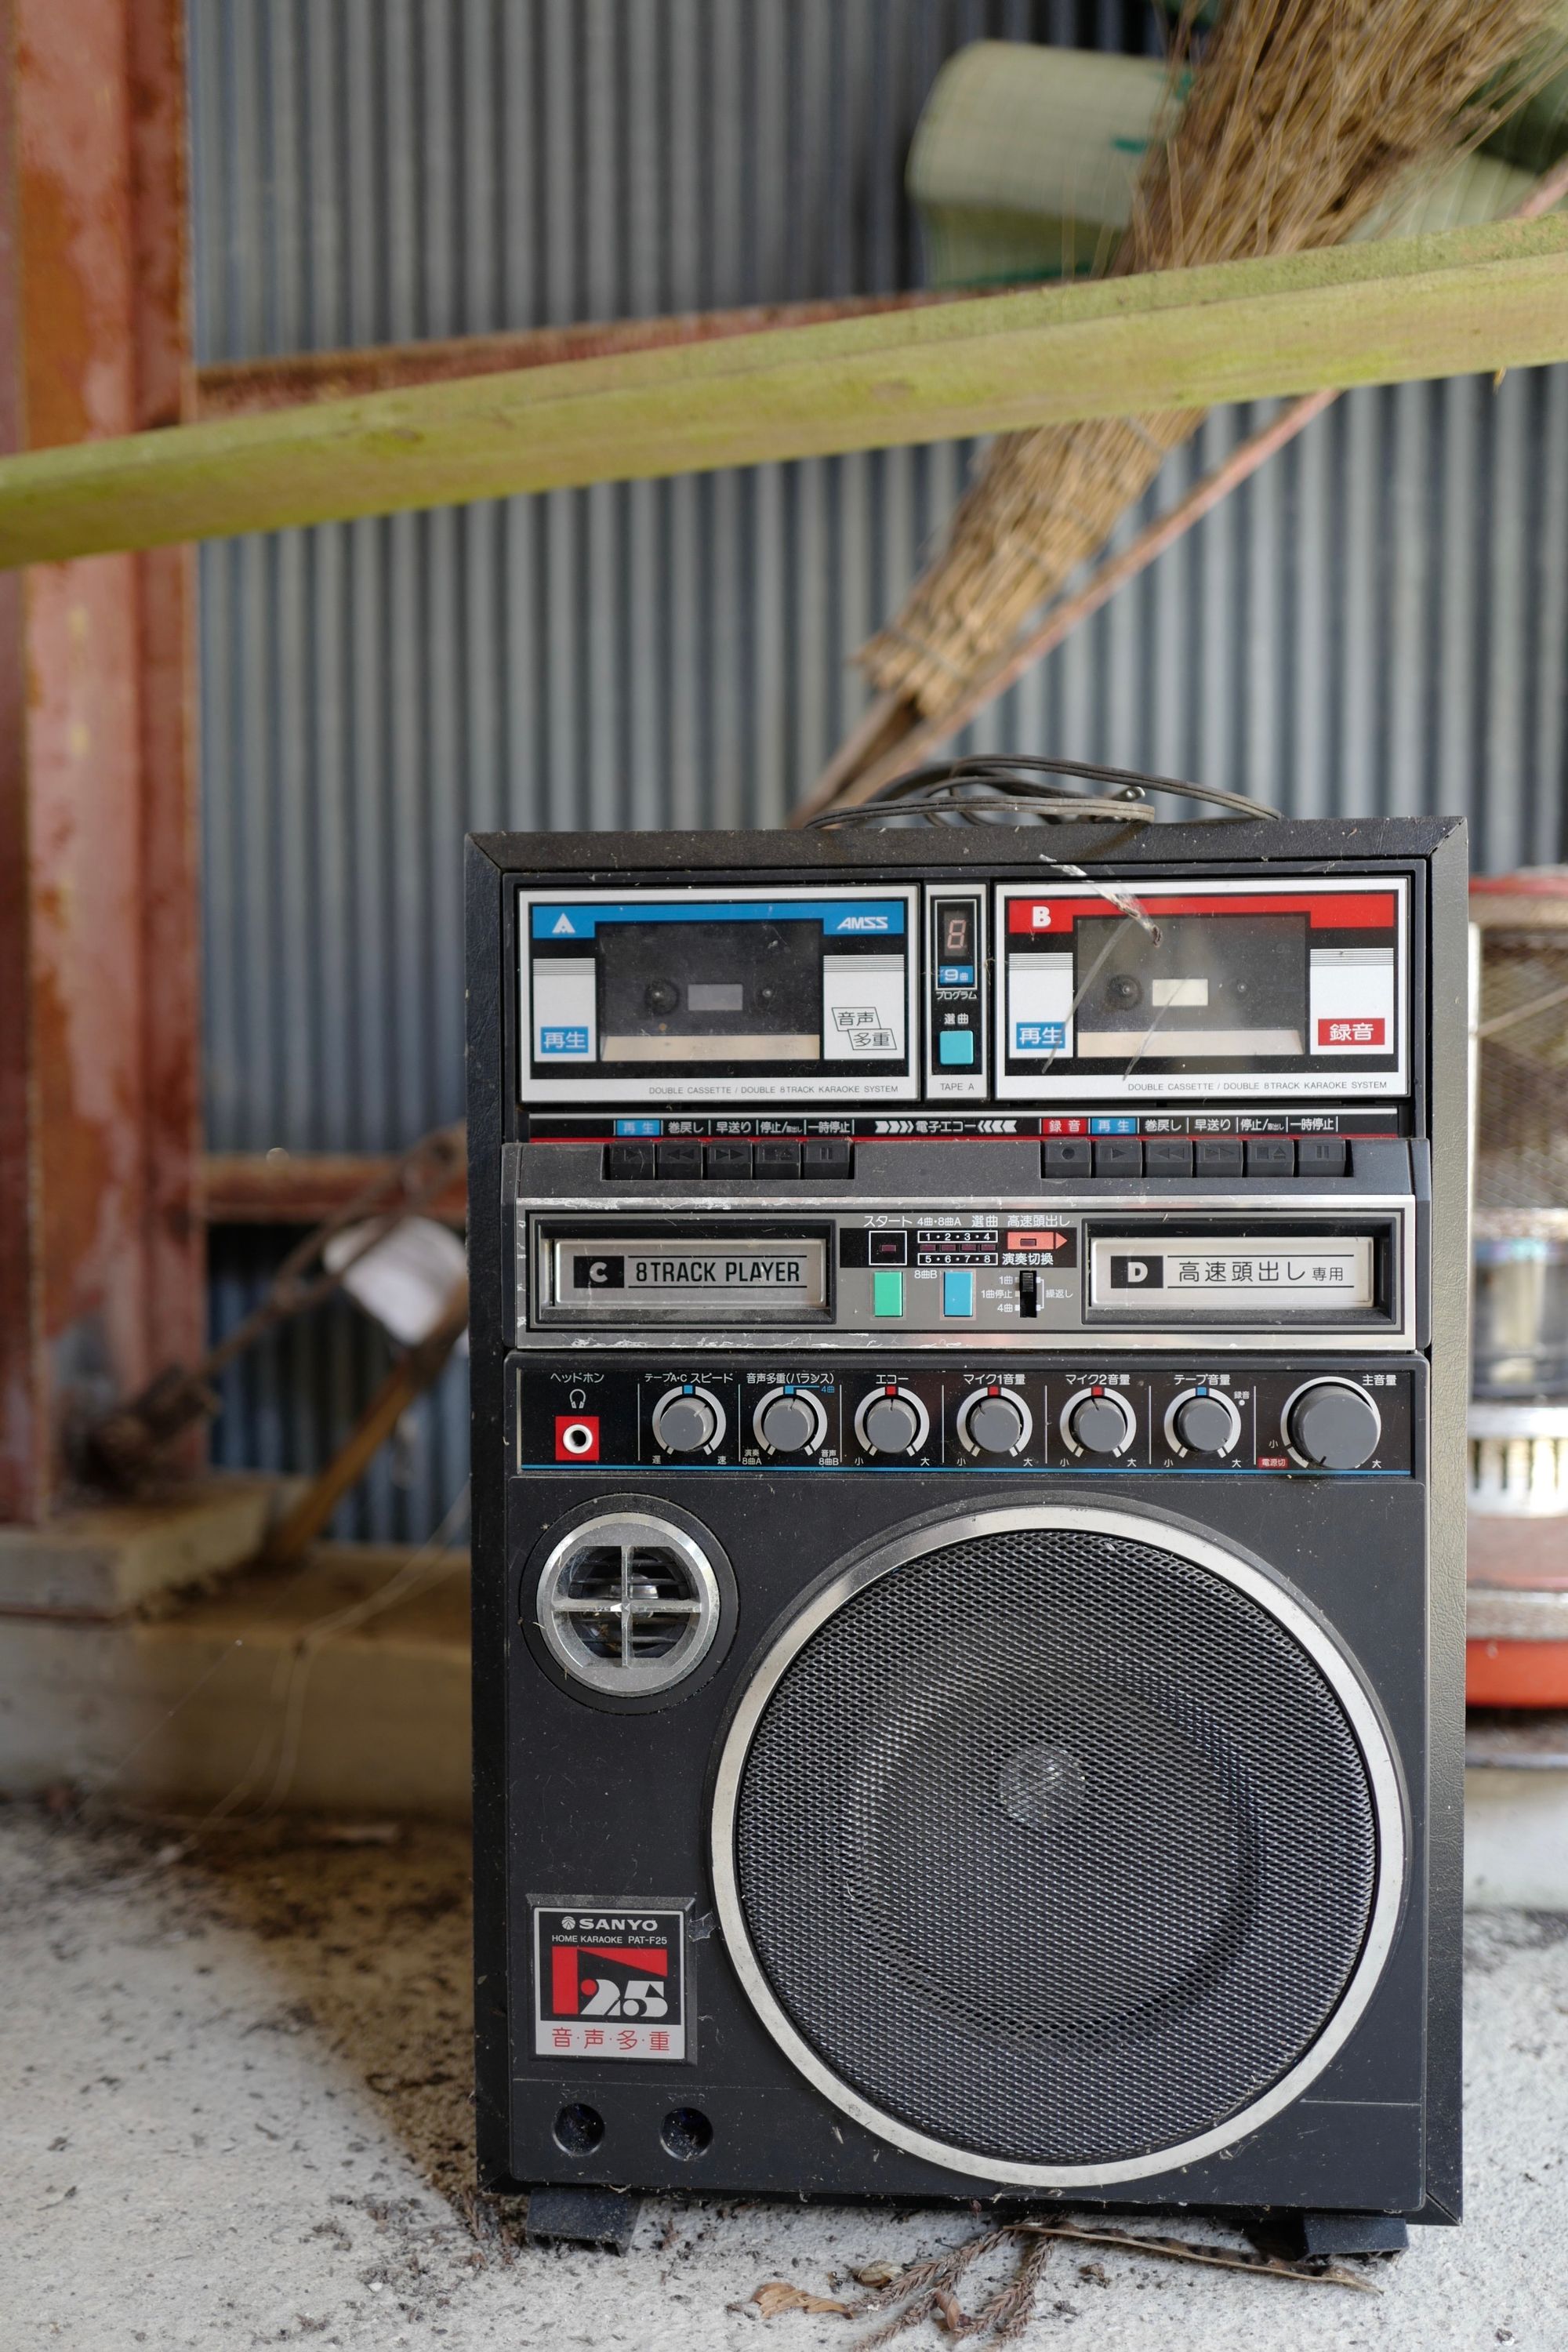 An 8-track player built into a larger speaker, in what appears to be a shed.